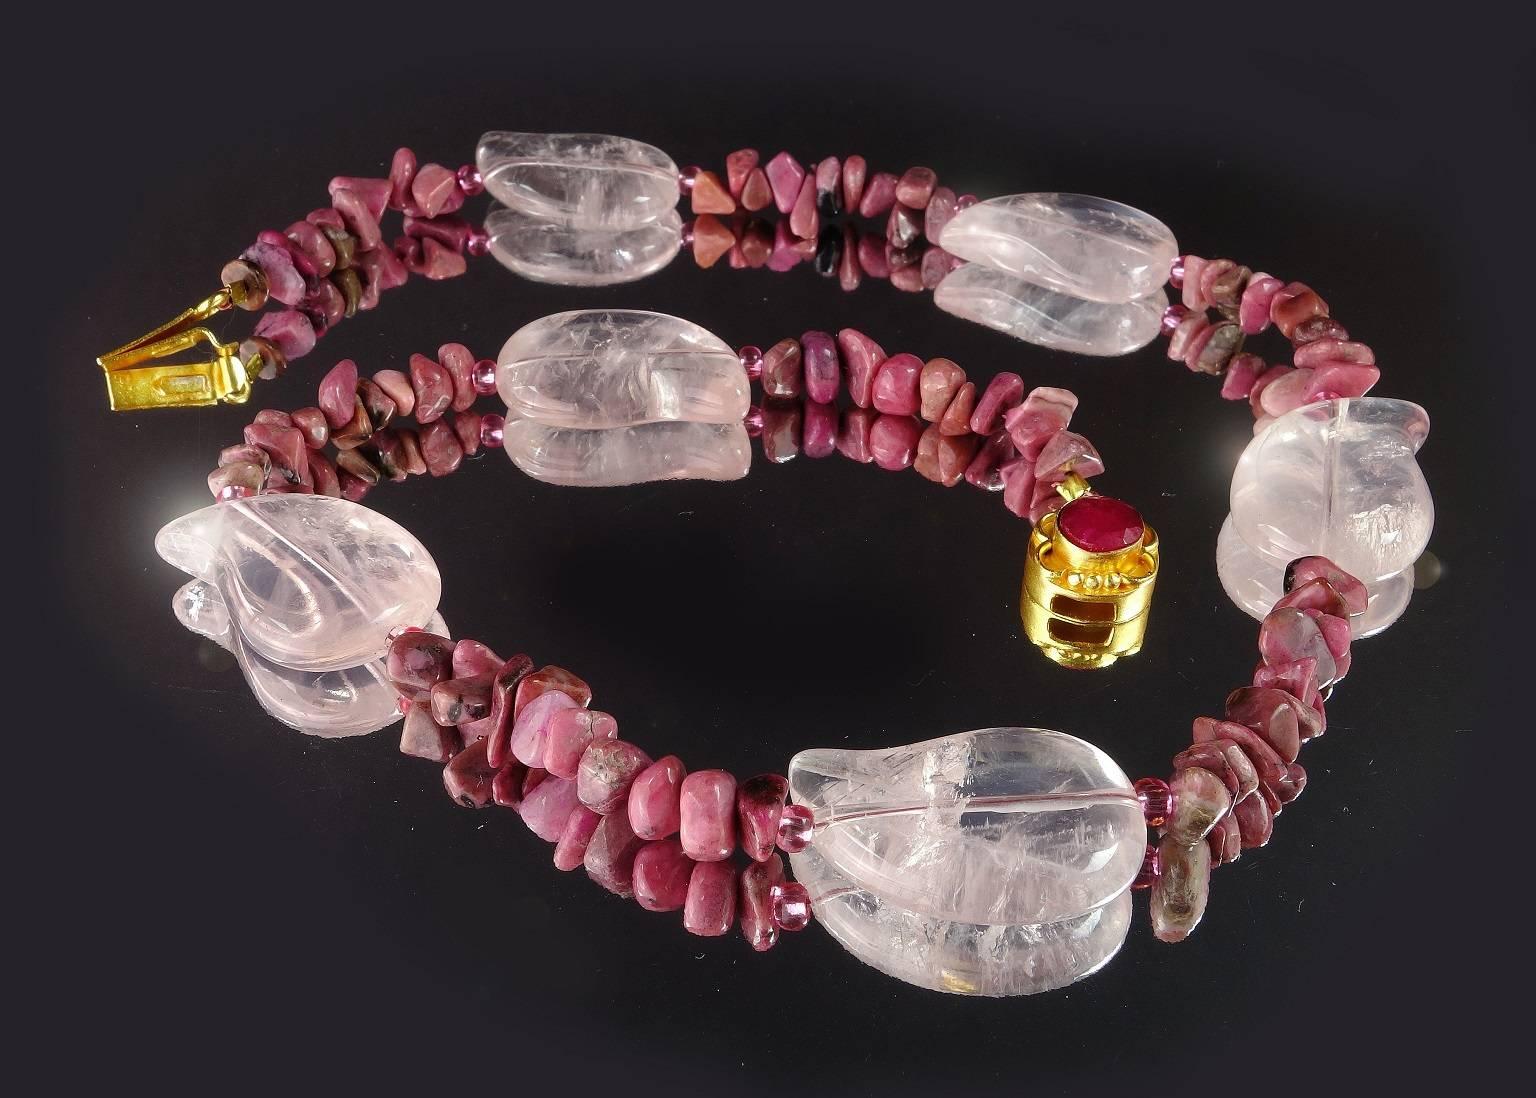 Necklace of leaf Shaped Rose Quartz and Polished Rhodonite Chips. The contrast of sparkling soft Rose Quartz and deeper Opaque Pink Rhodonite is fantastic. The Rose Quartz is accented with pink Czech beads. The box clasp is gold tone accented with